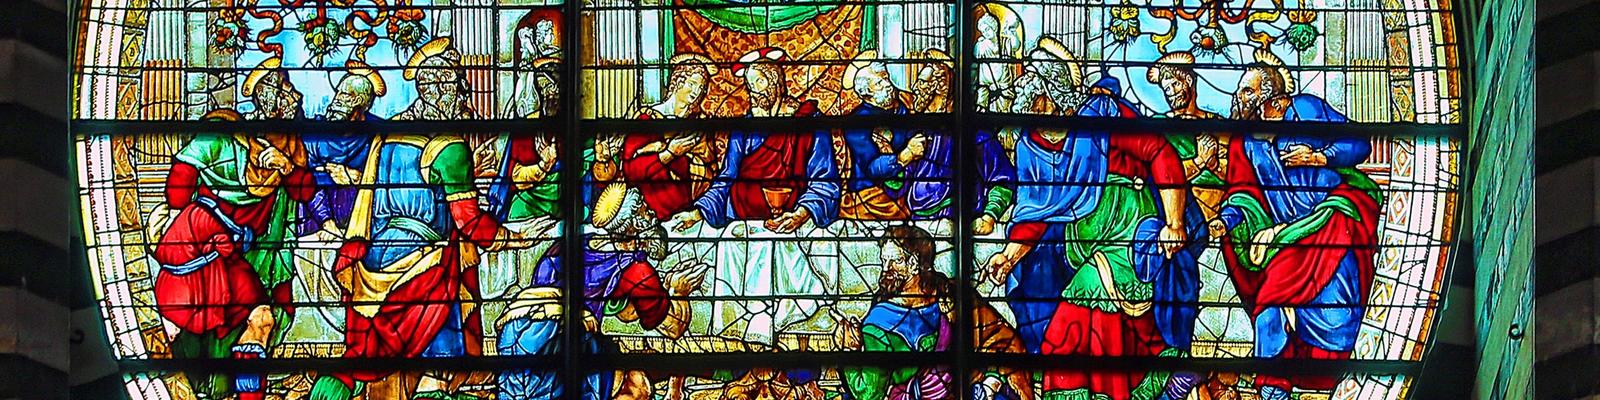 Stained glass window showing religious scene